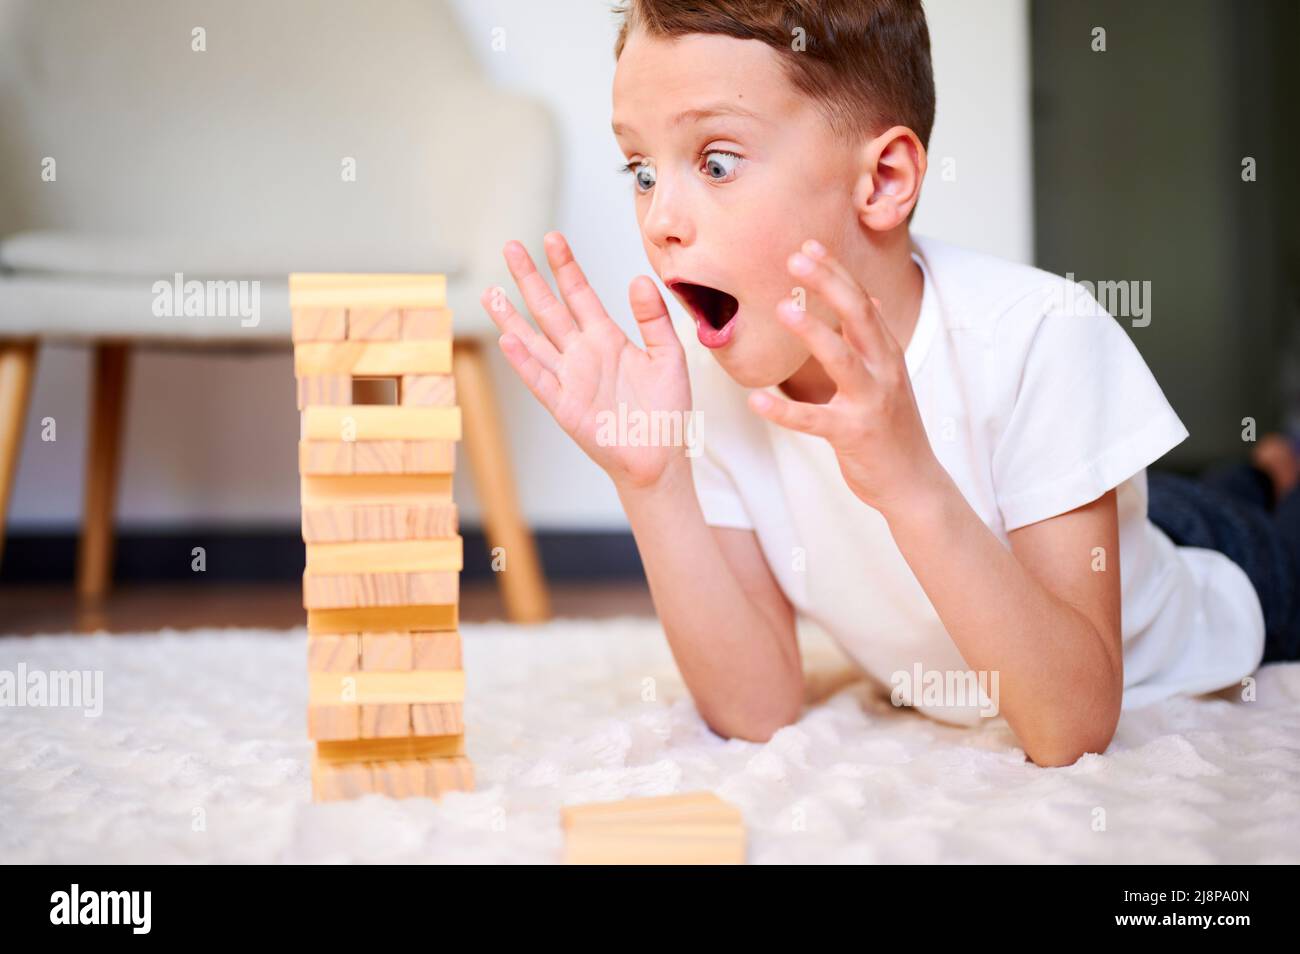 Boy playing wooden block removal tower game at home. Board game Jenga. Kids leisure concept. Stock Photo